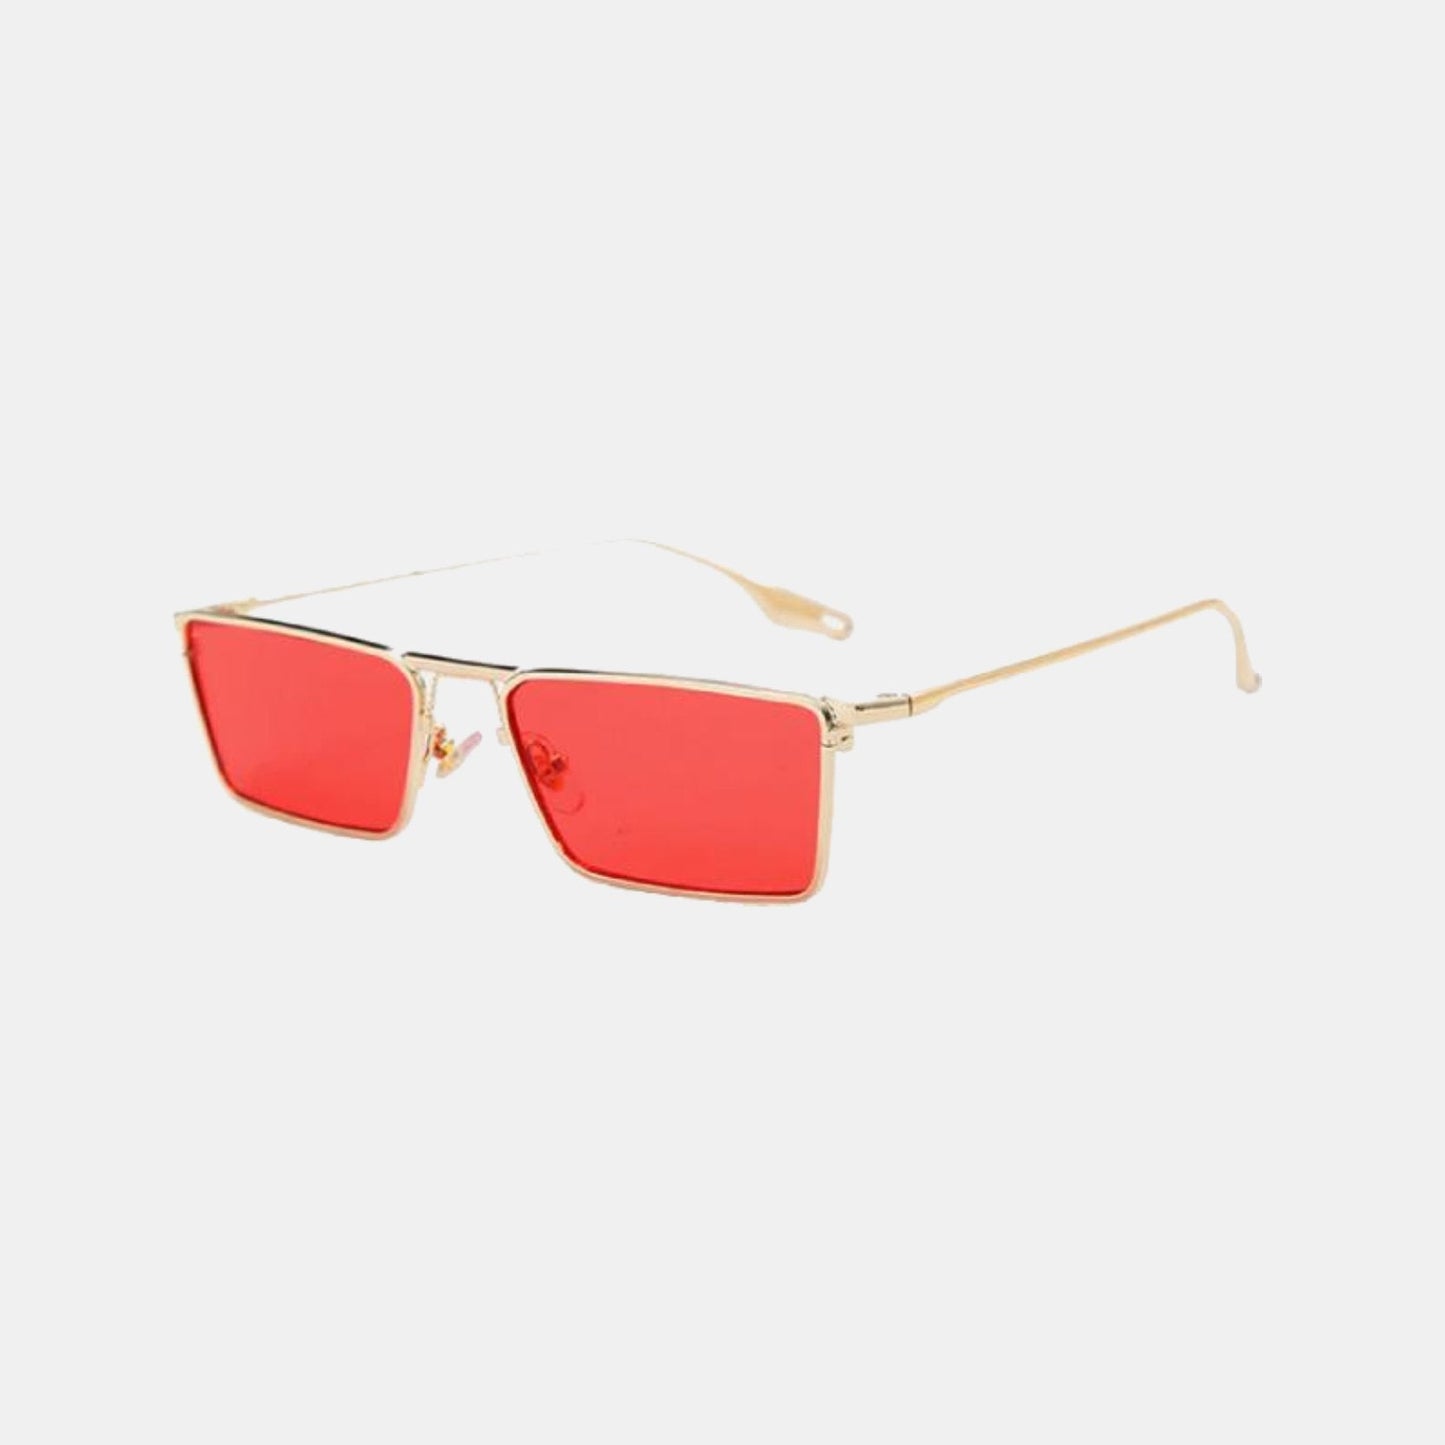 "QUENCH" SUNGLASSES